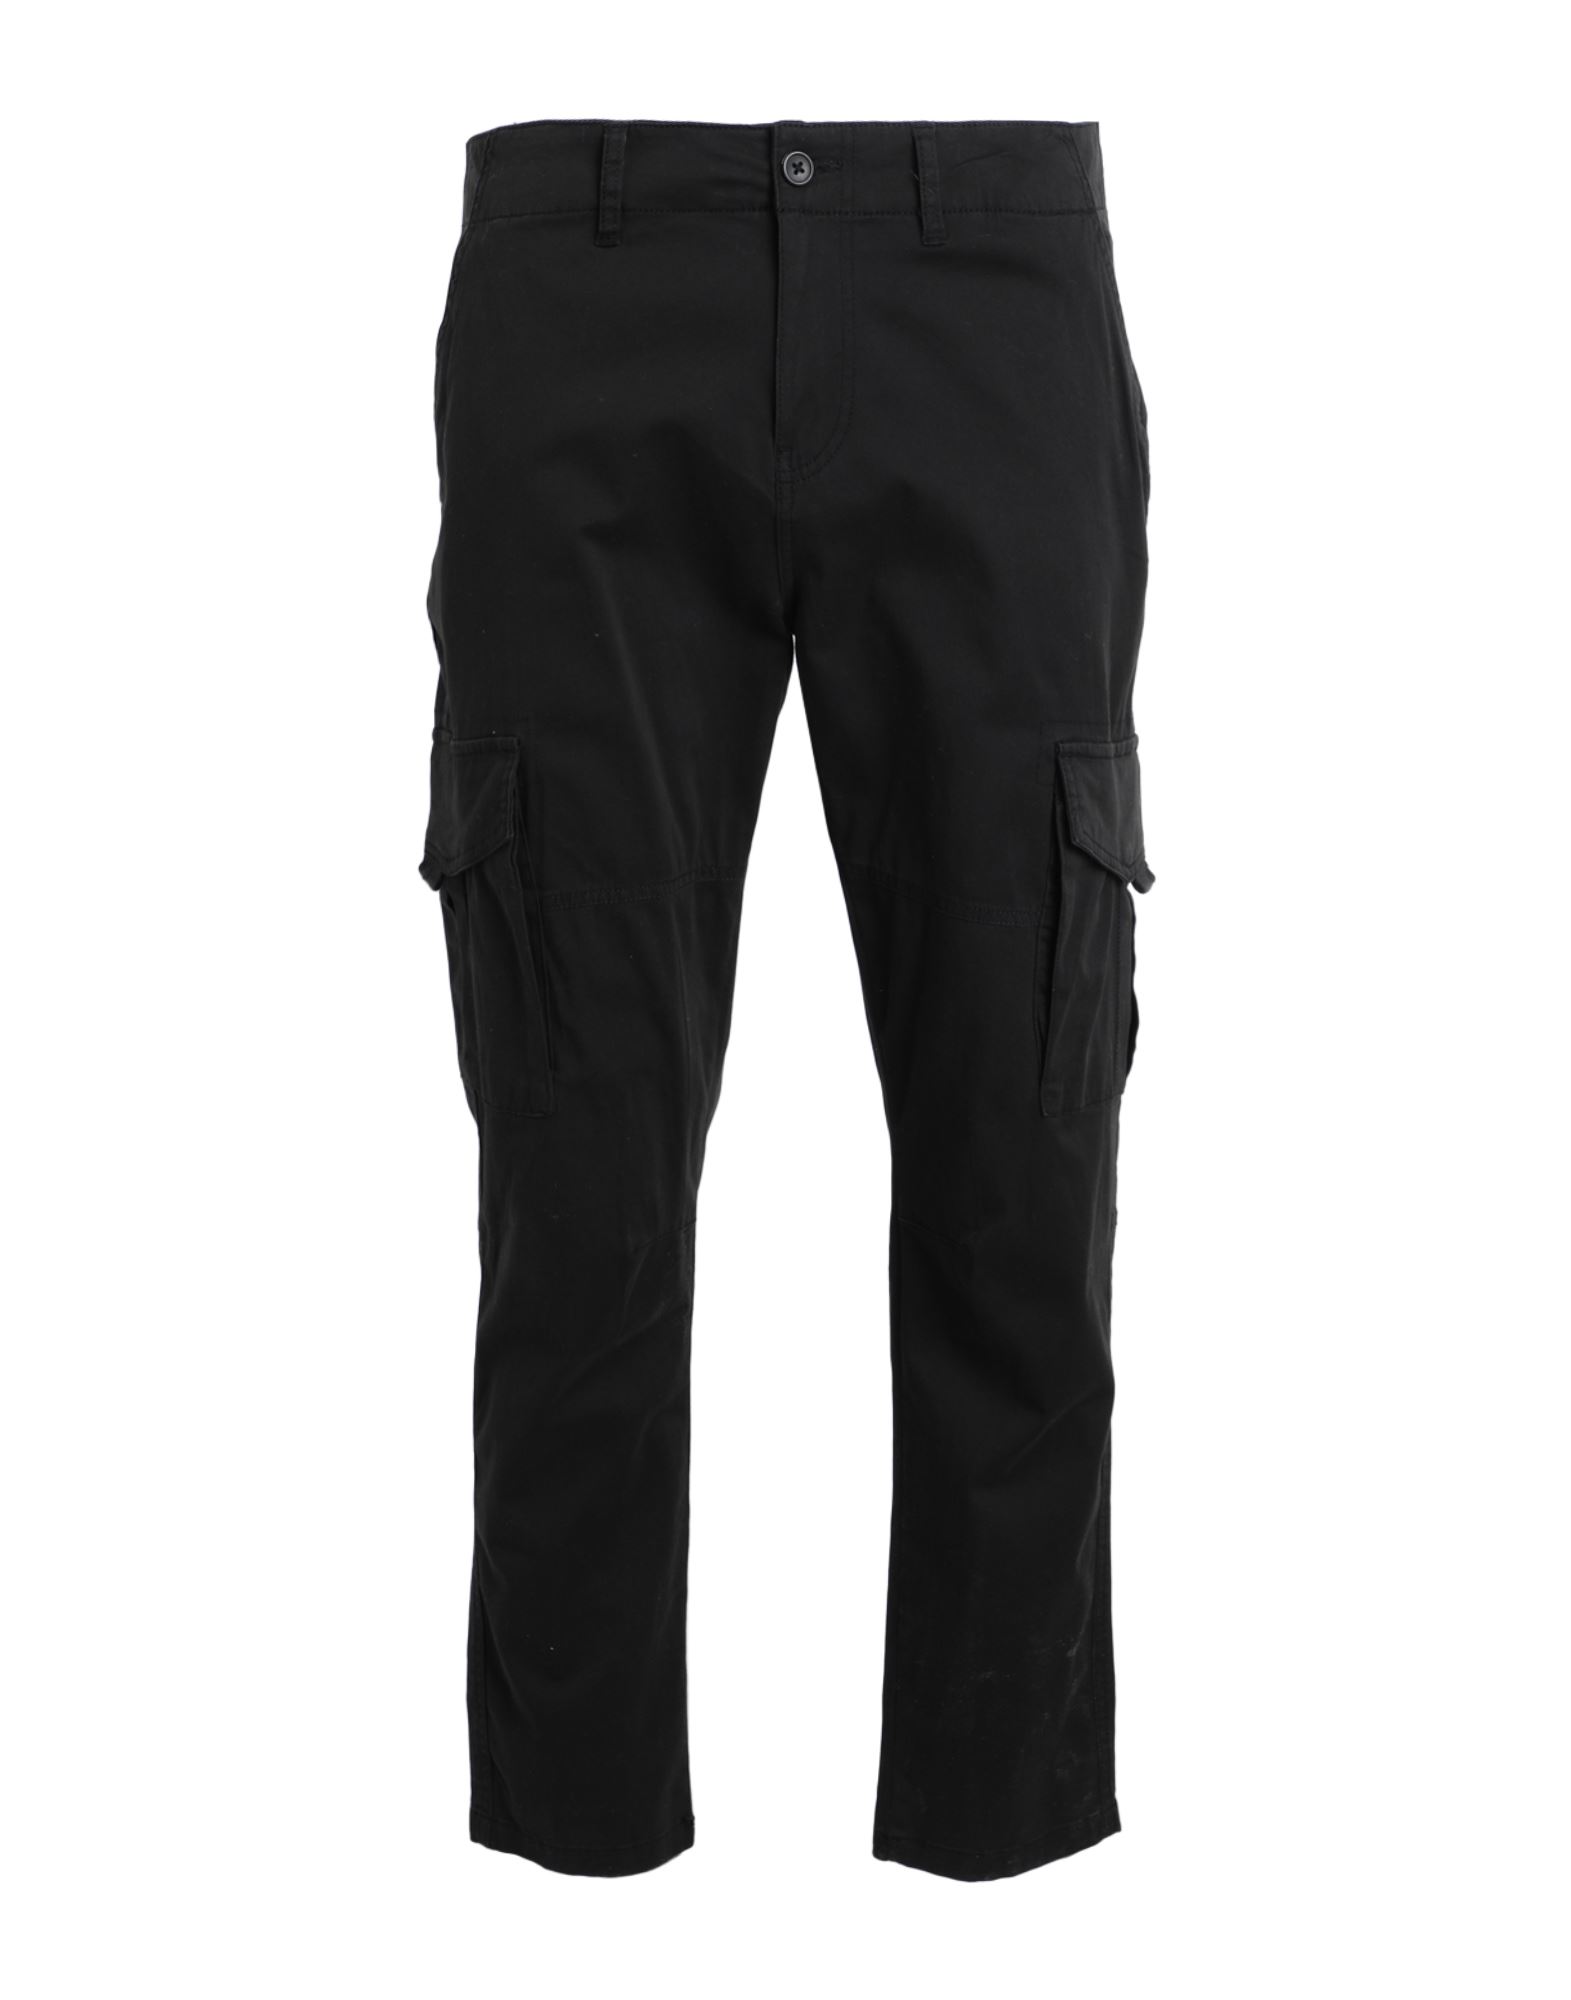 Only & Sons Man Pants Black Size 28w-32l Cotton, Recycled Cotton, Elastane